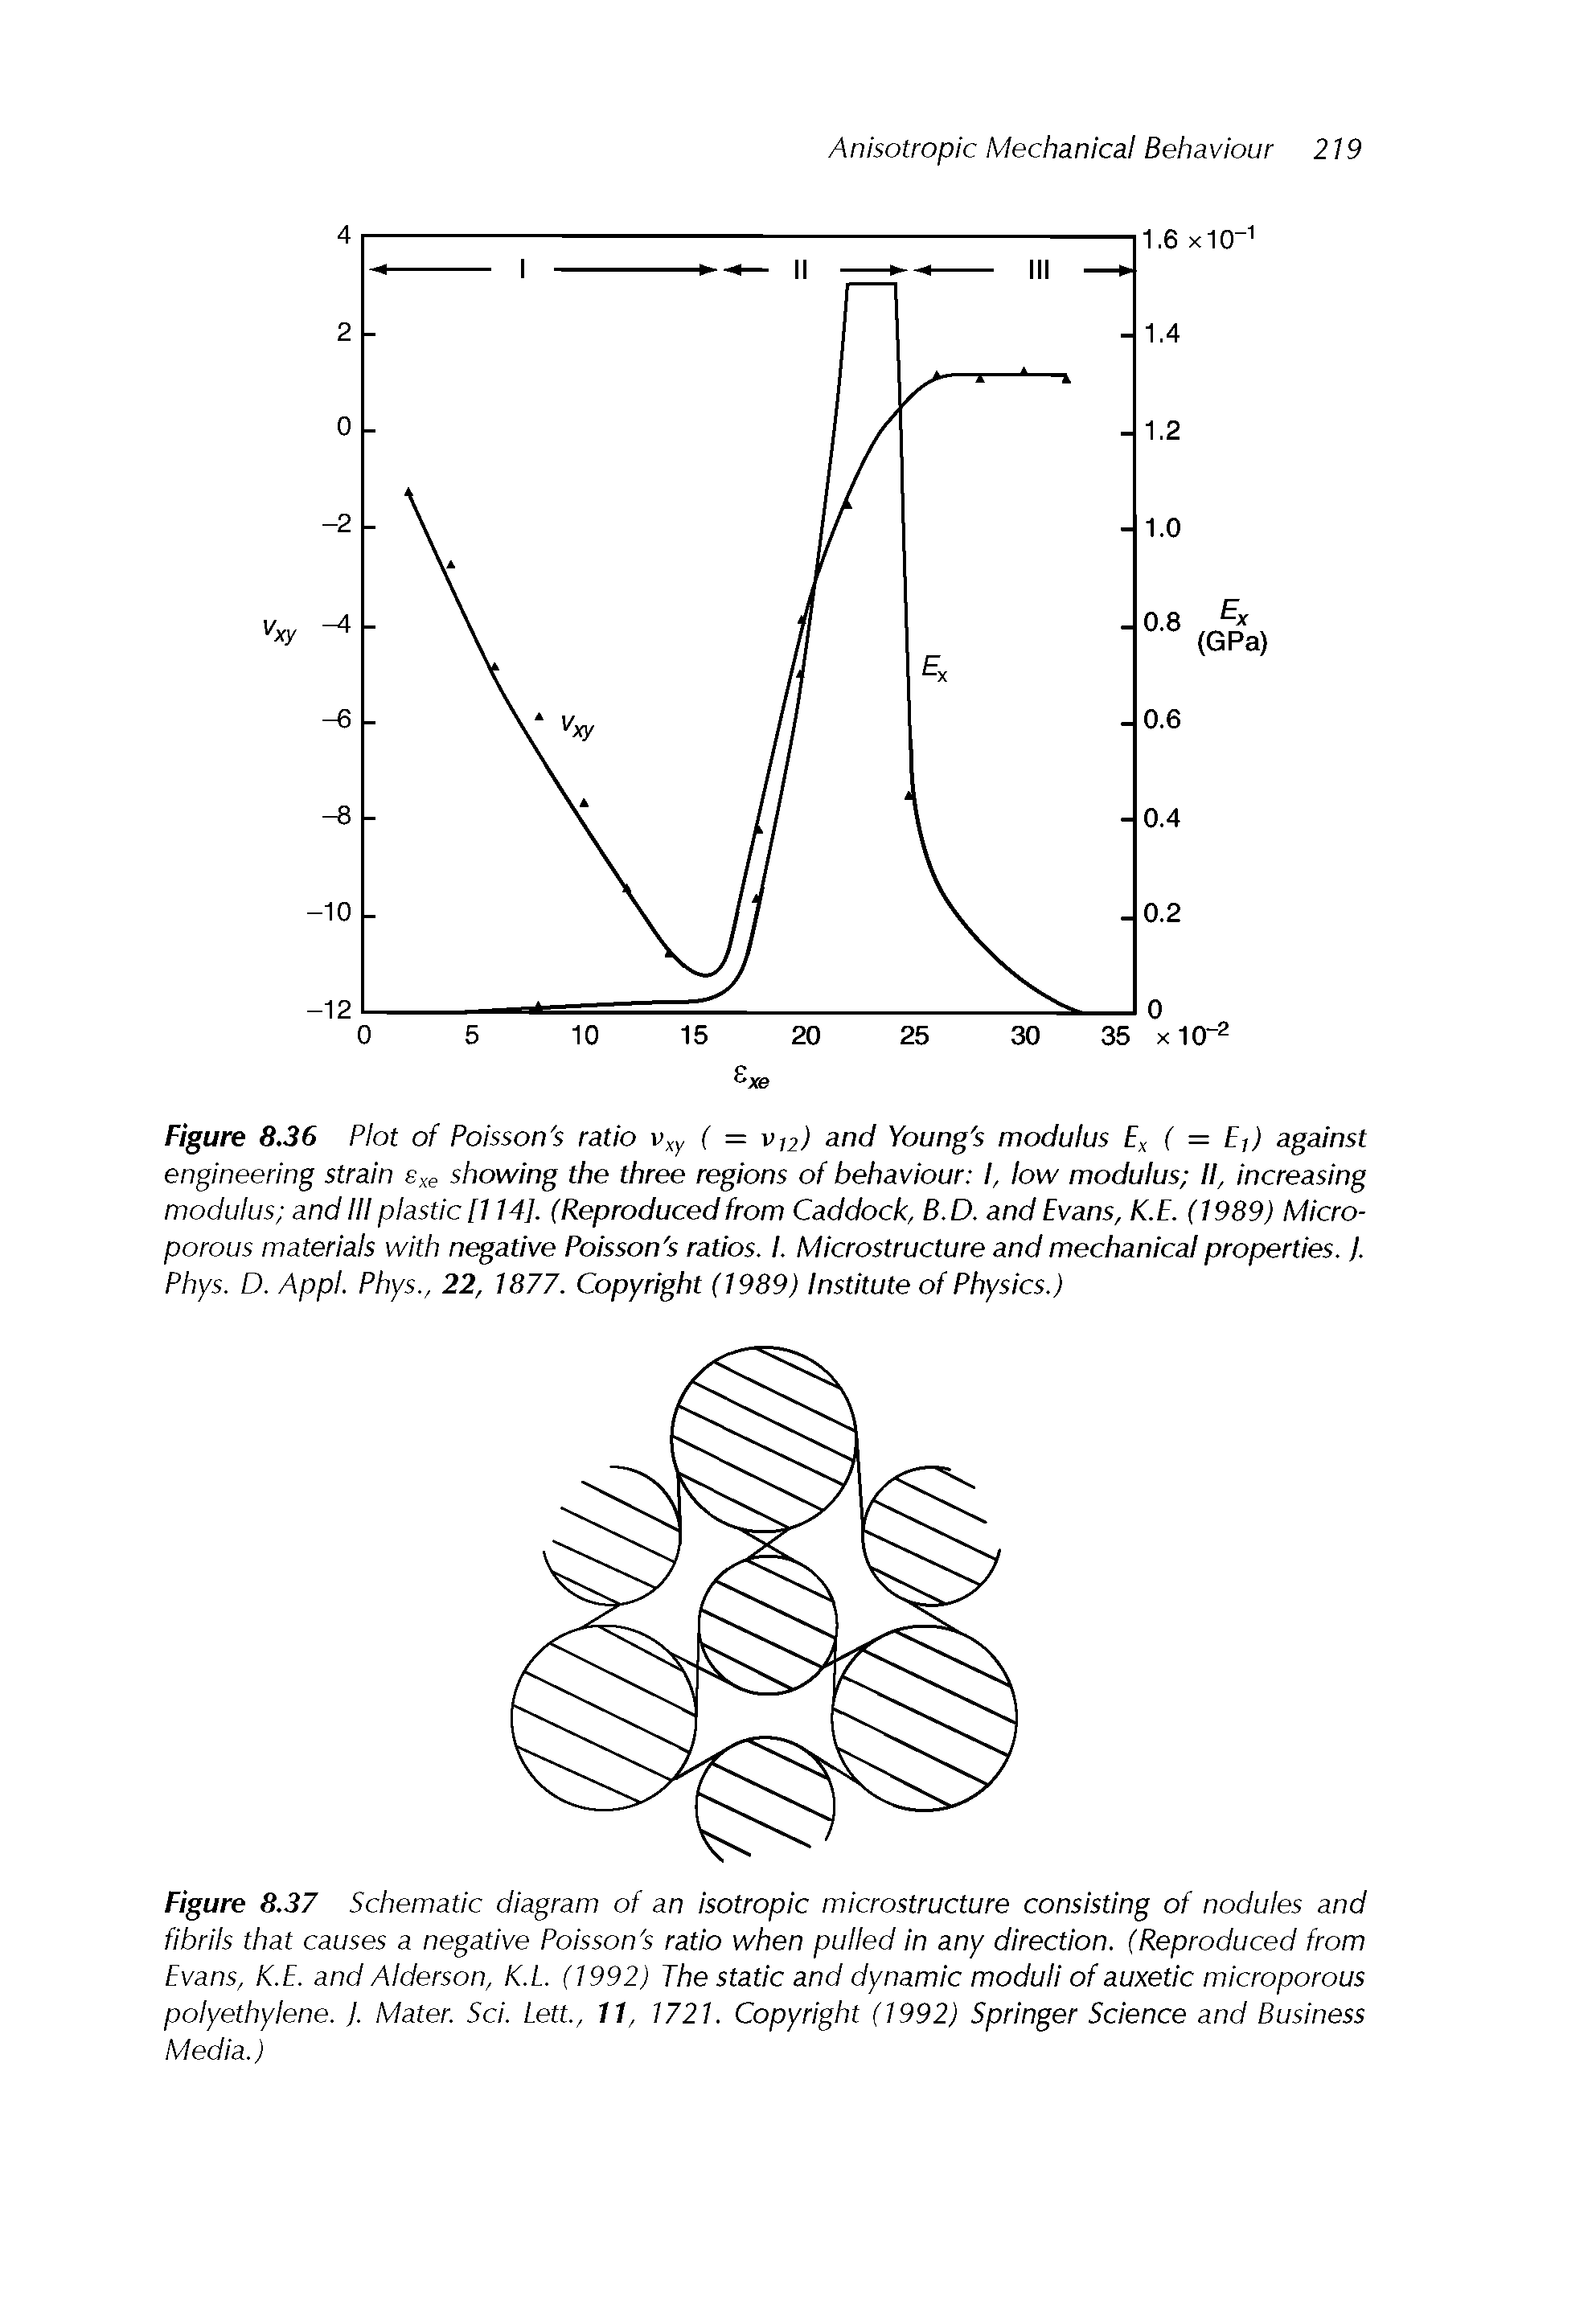 Figure 8.37 Schematic diagram of an isotropic microstructure consisting of nodules and fibrils that causes a negative Poisson s ratio when pulled In any direction. (Reproduced from Evans, K.E. and Alderson, K.L (1992) The static and dynamic moduli of auxetic microporous polyethylene. ]. Mater. Sci. Lett, 11, 1721. Copyright (1992) Springer Science and Business Media.)...